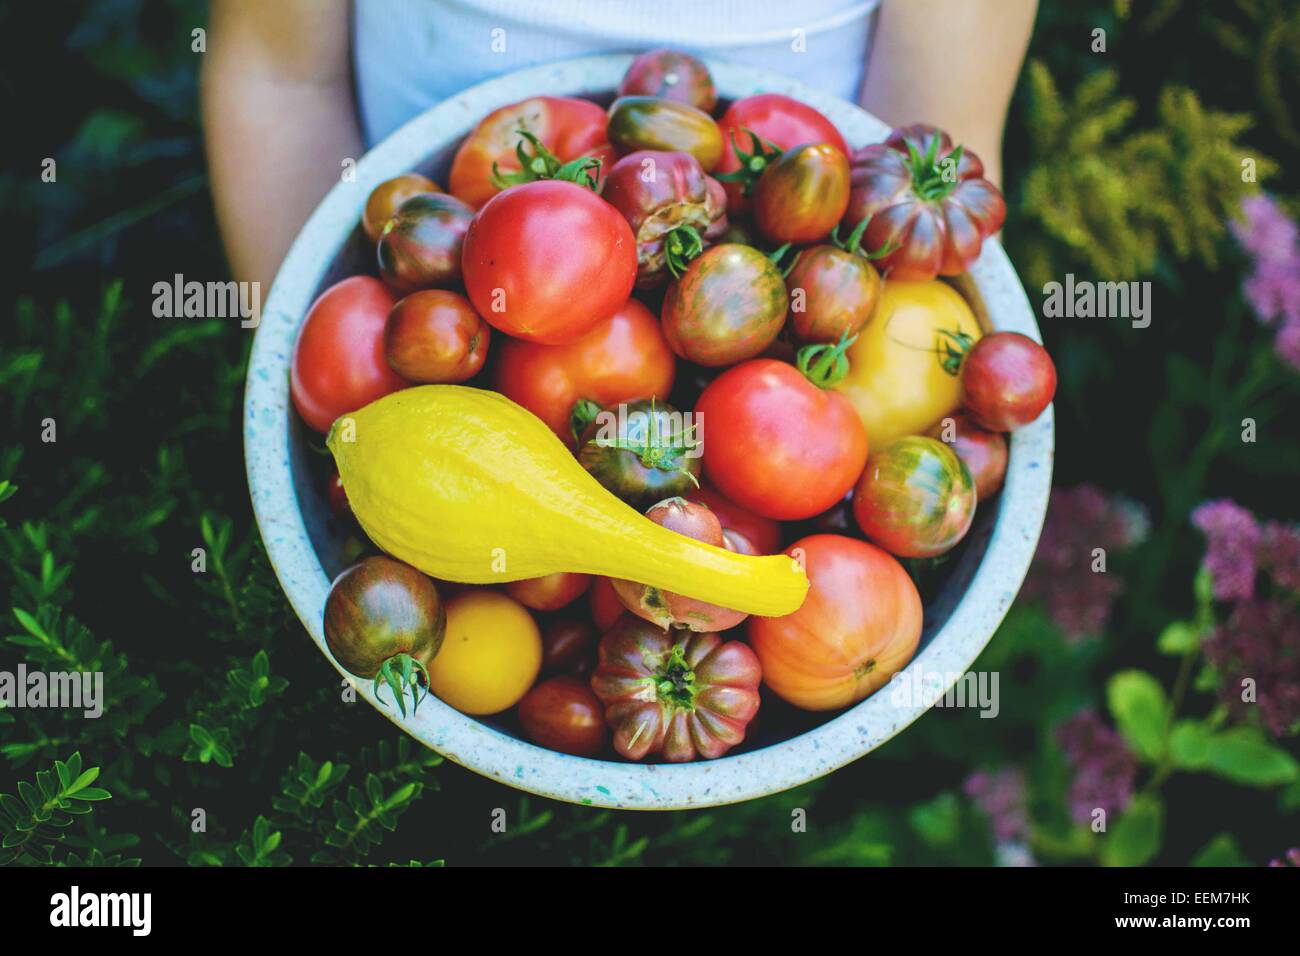 Boy standing in the garden holding a bowl of freshly picked tomatoes Stock Photo